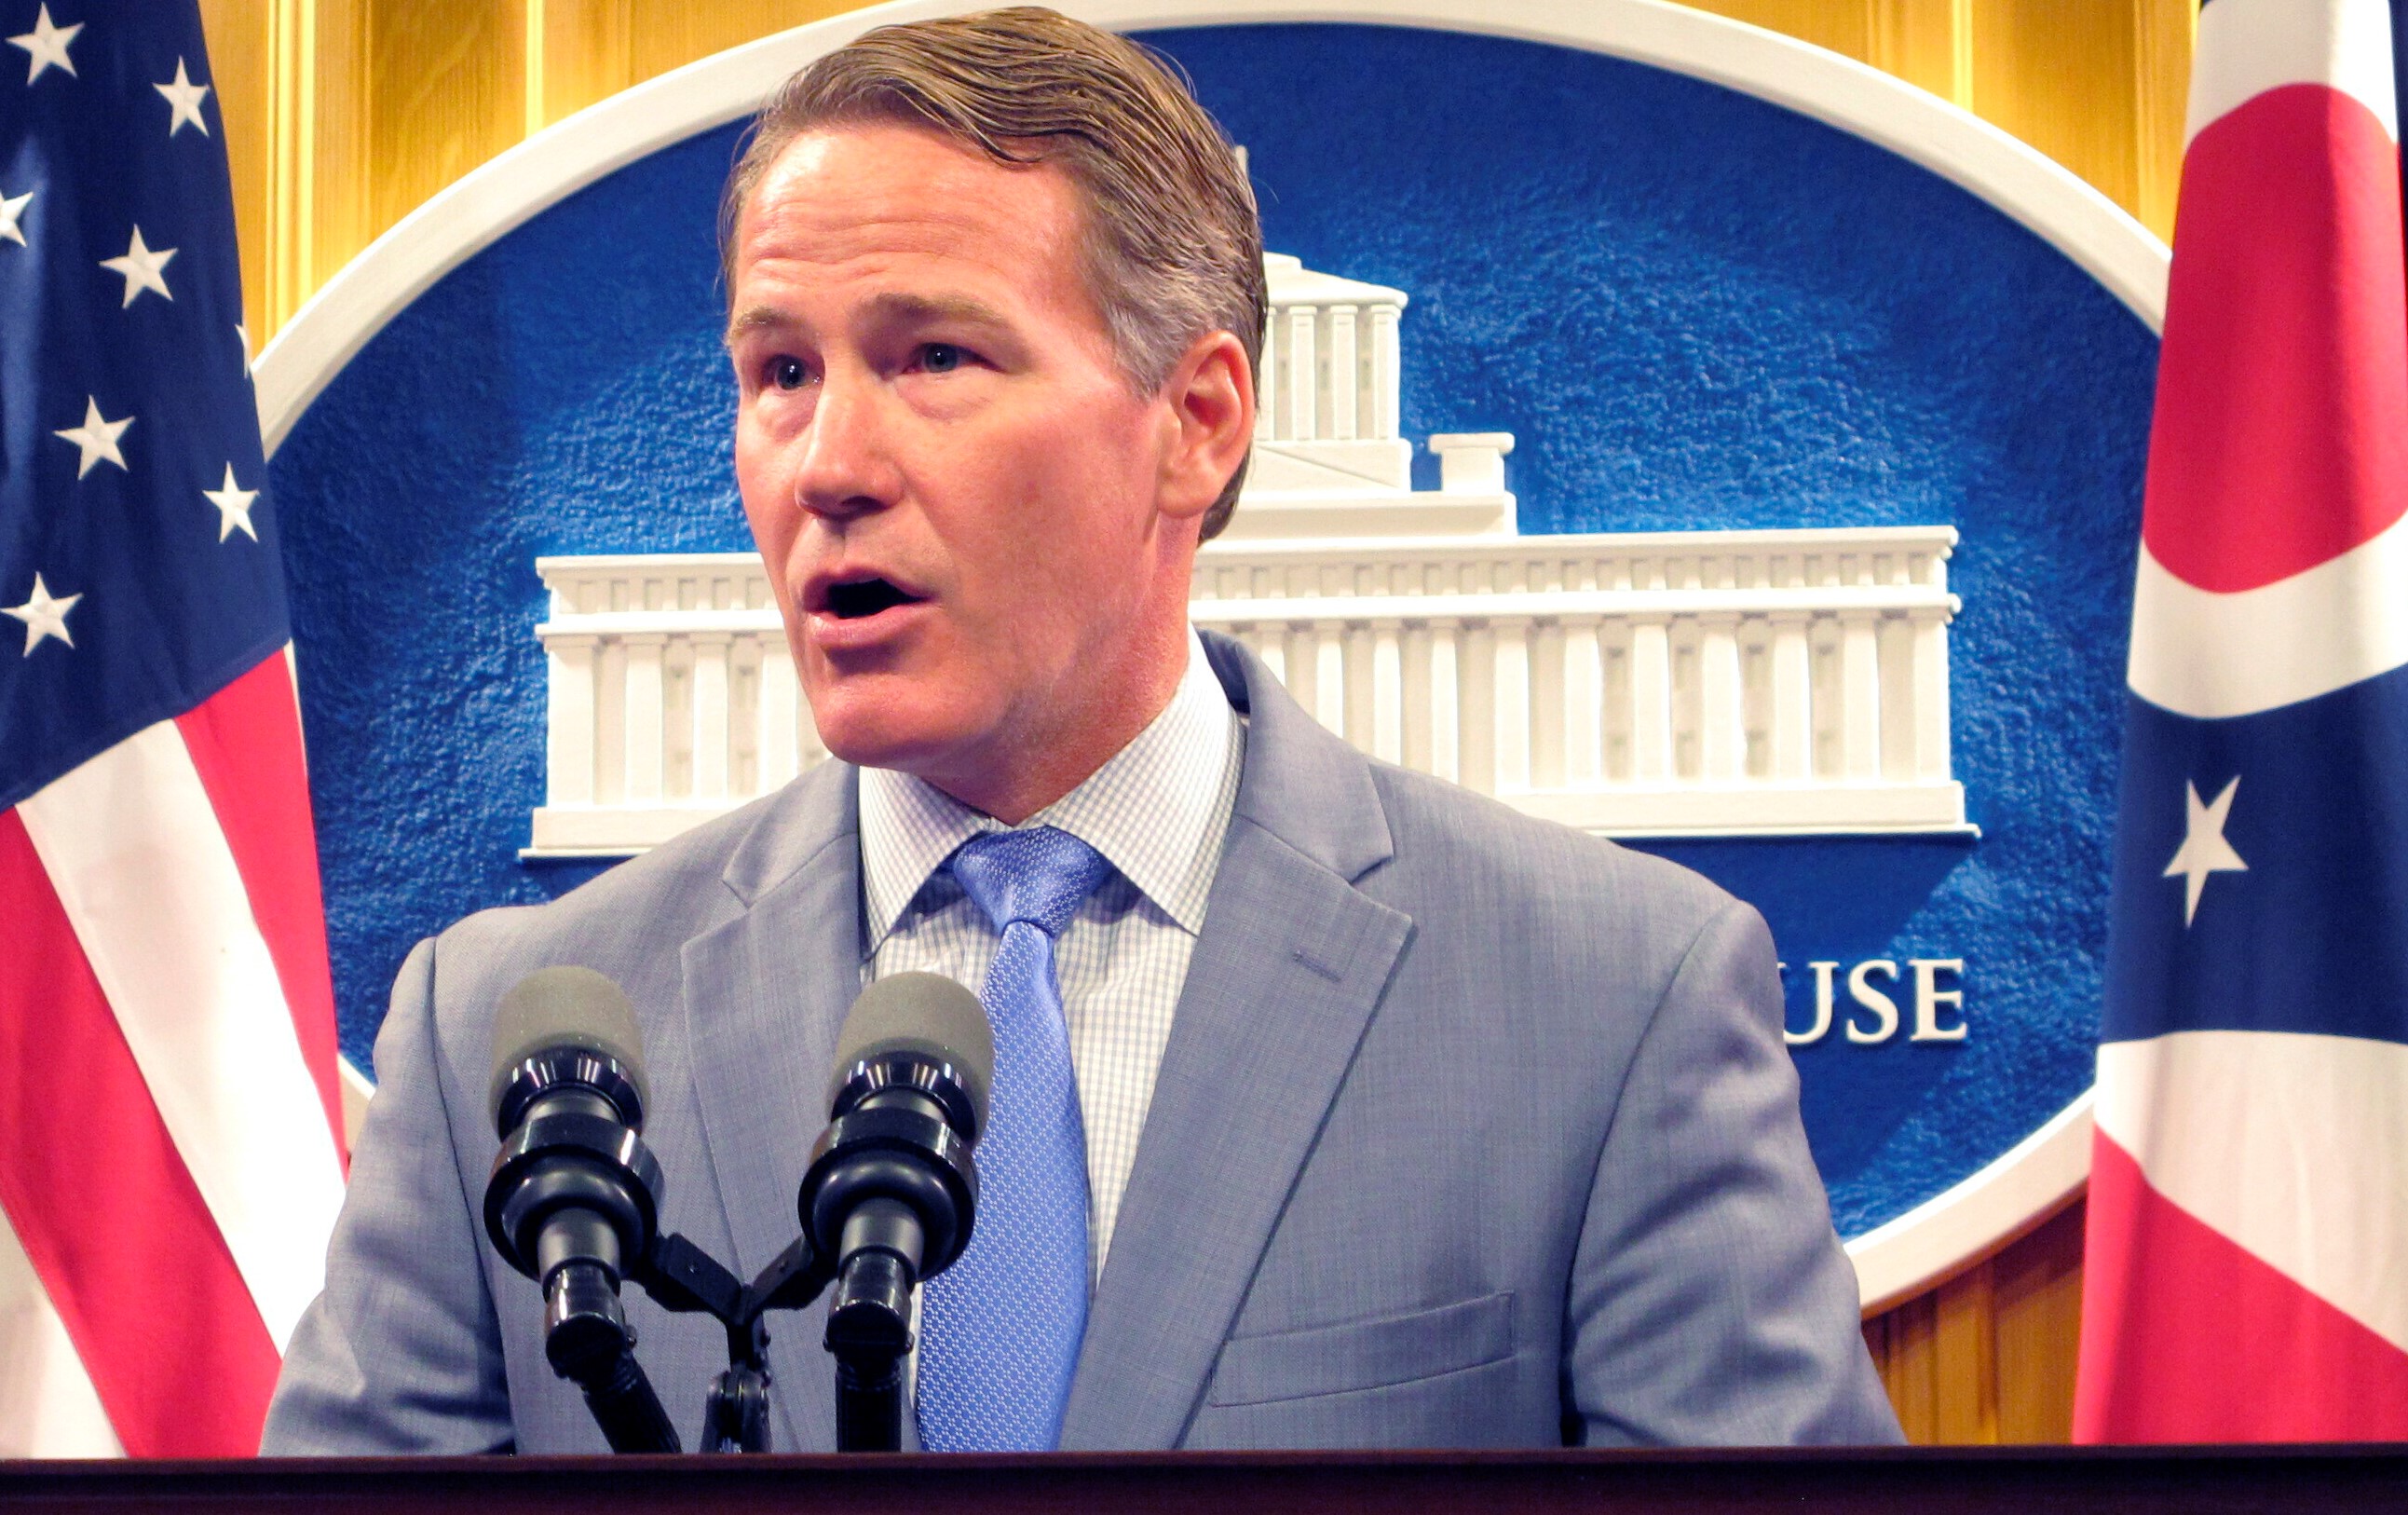 About Lt. Governor Jon Husted